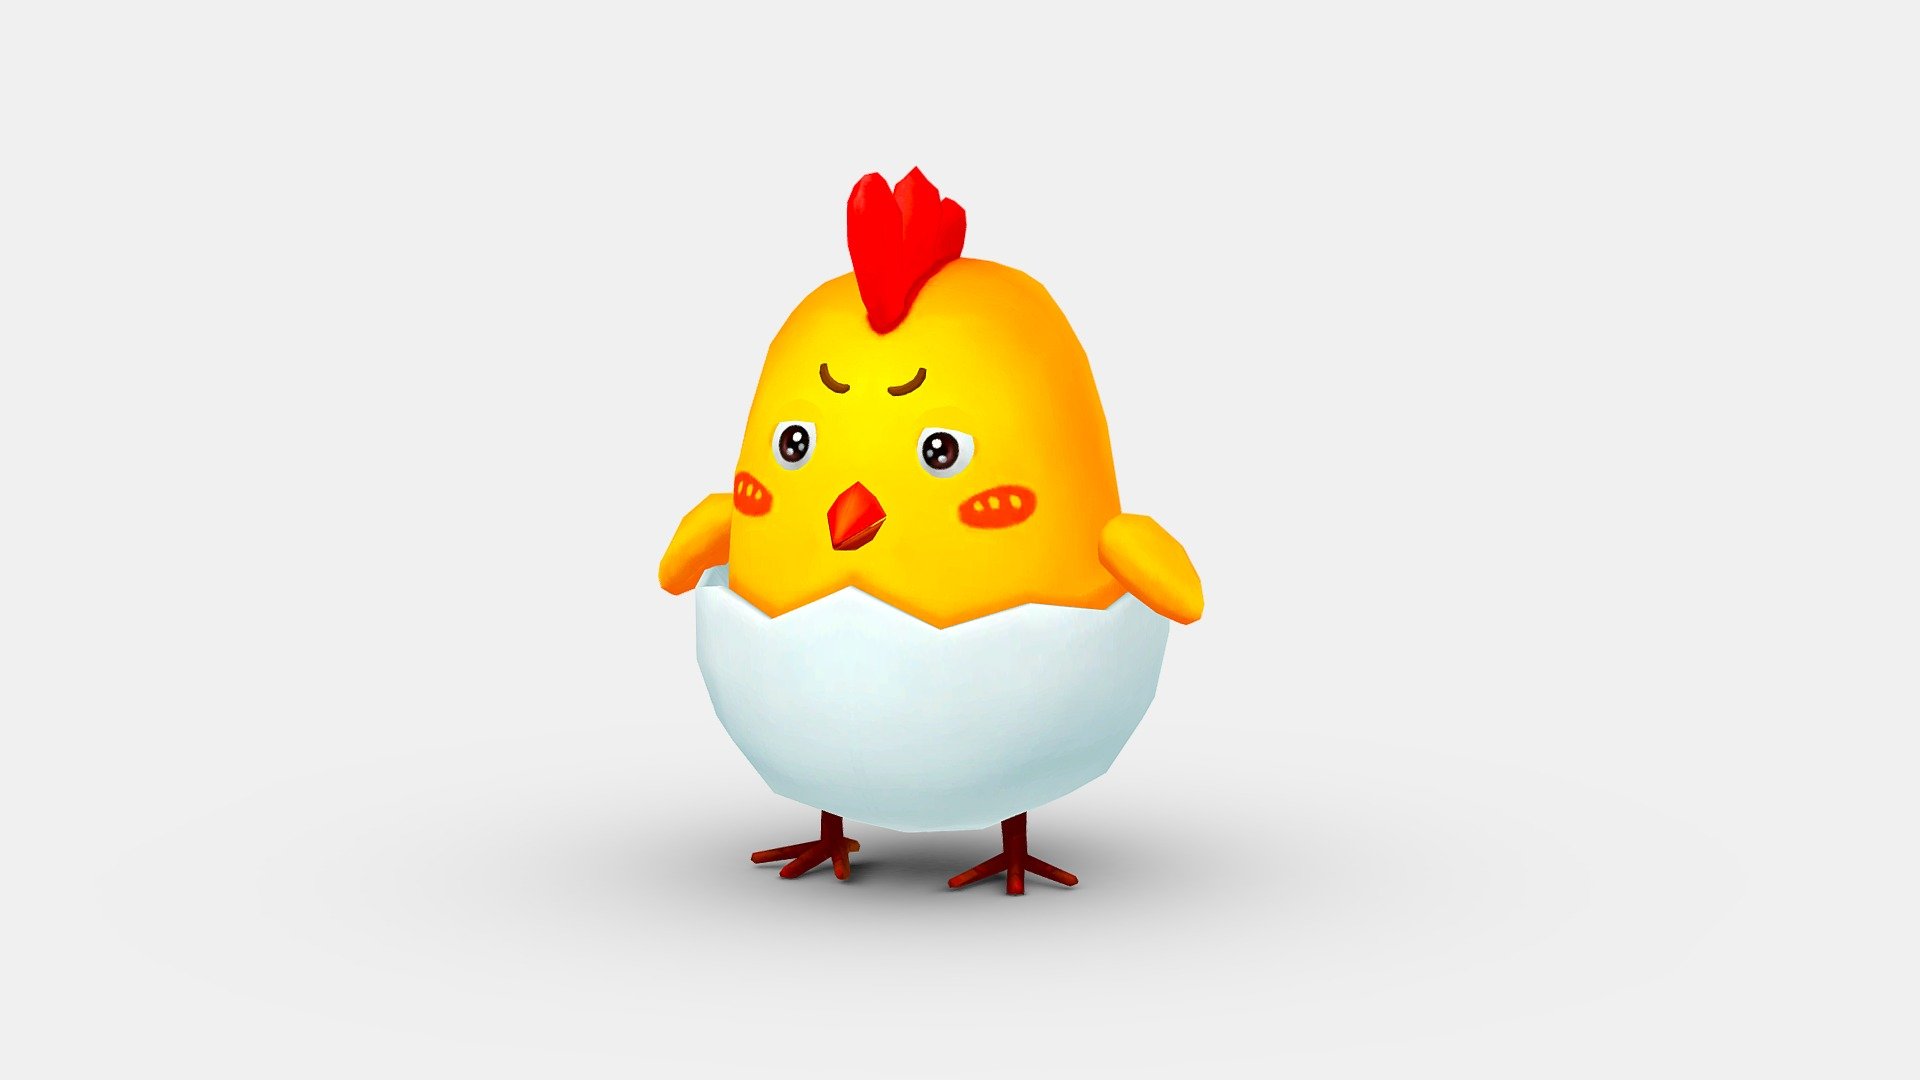 animated baby chickens